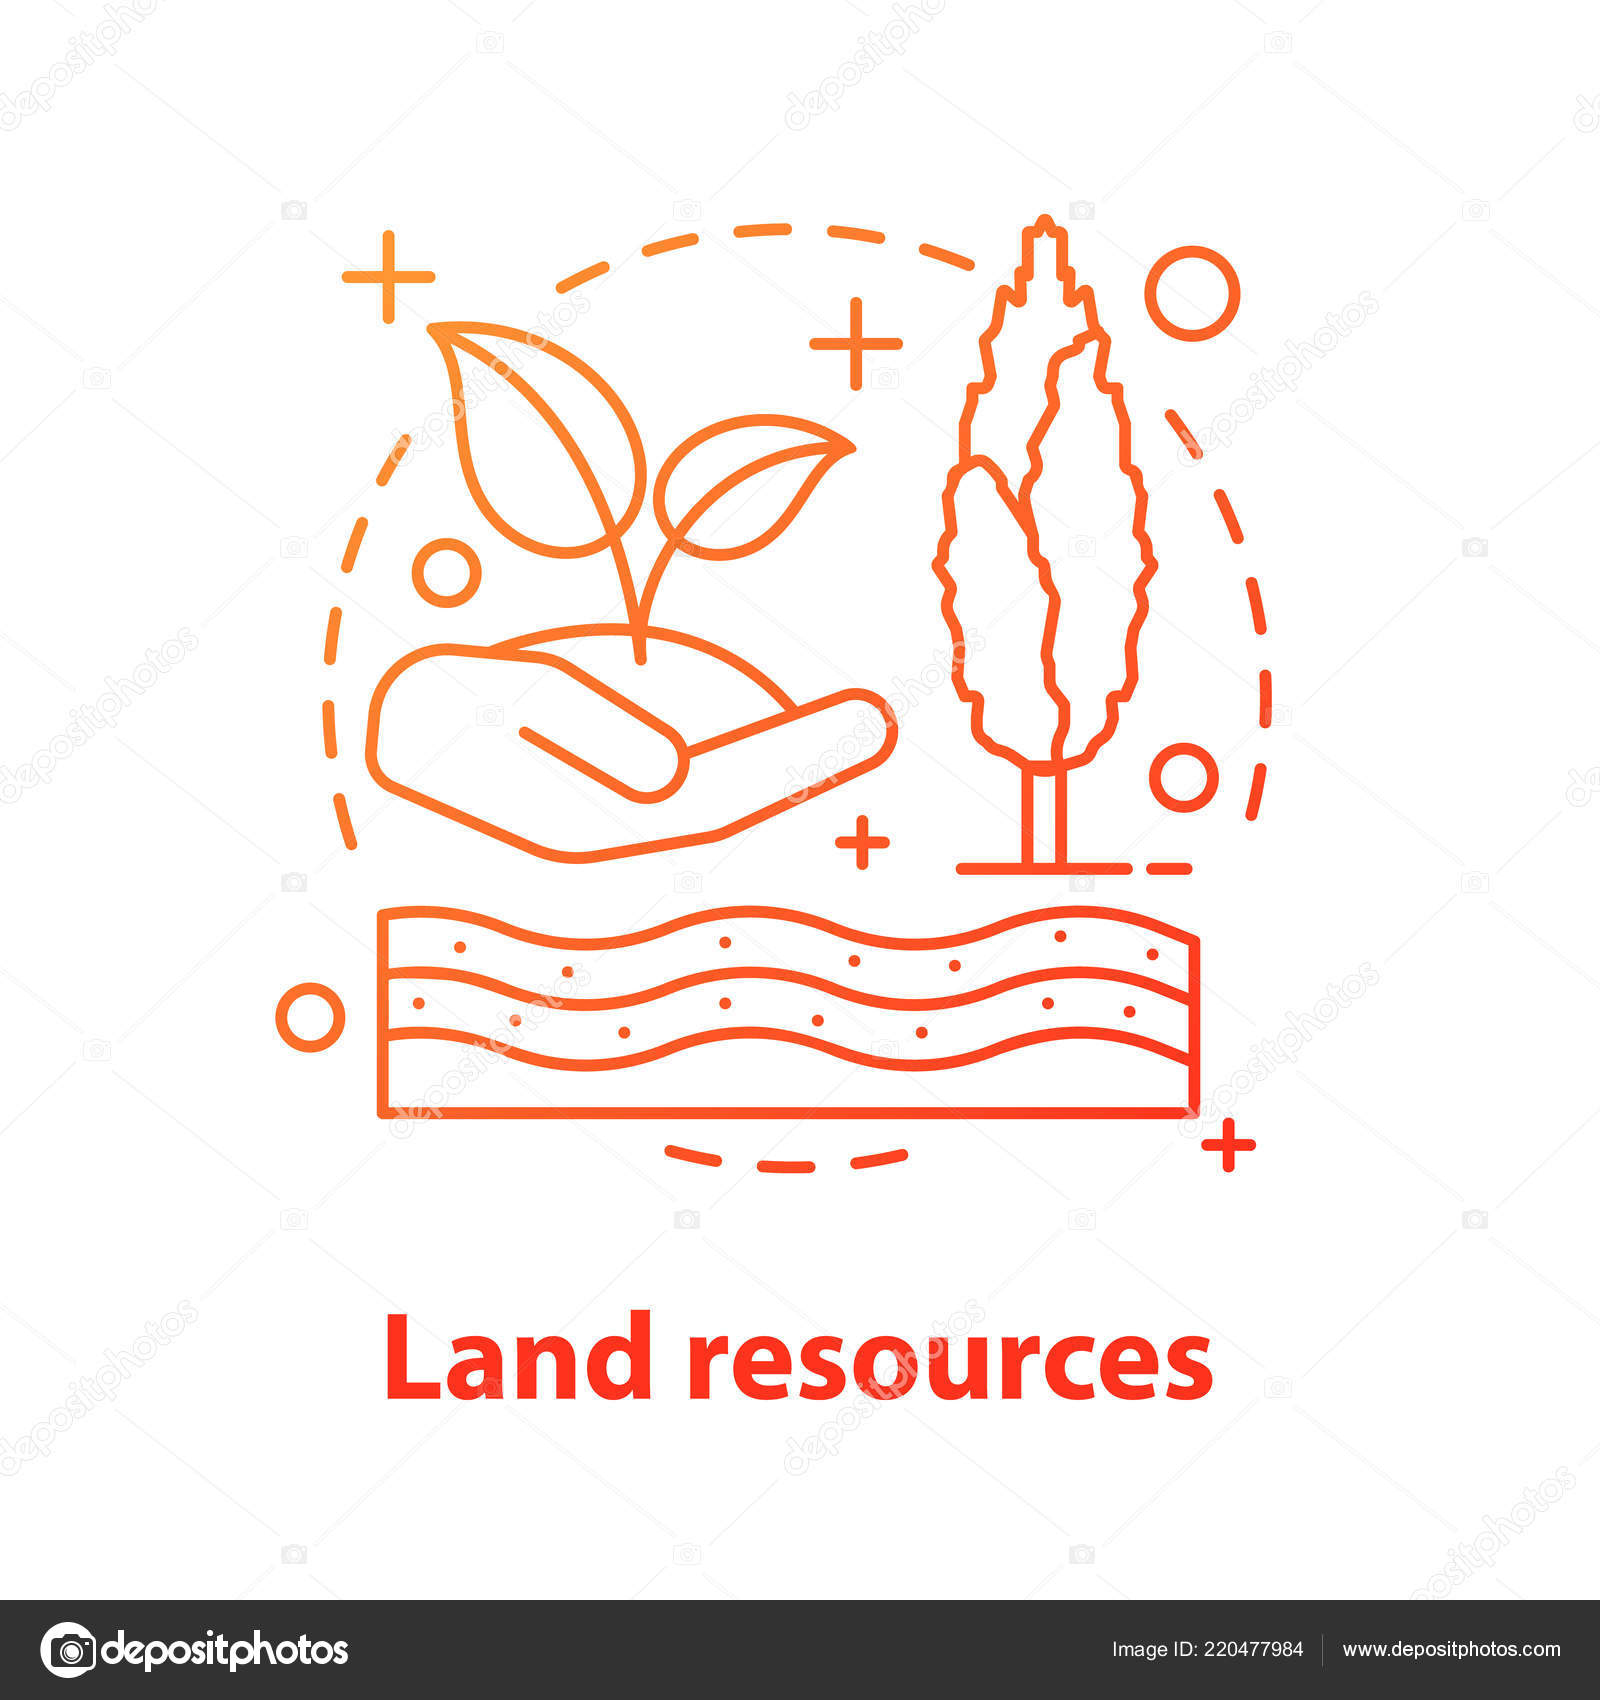 Our Natural Resources Are Depleting by Jackie Kao on Dribbble